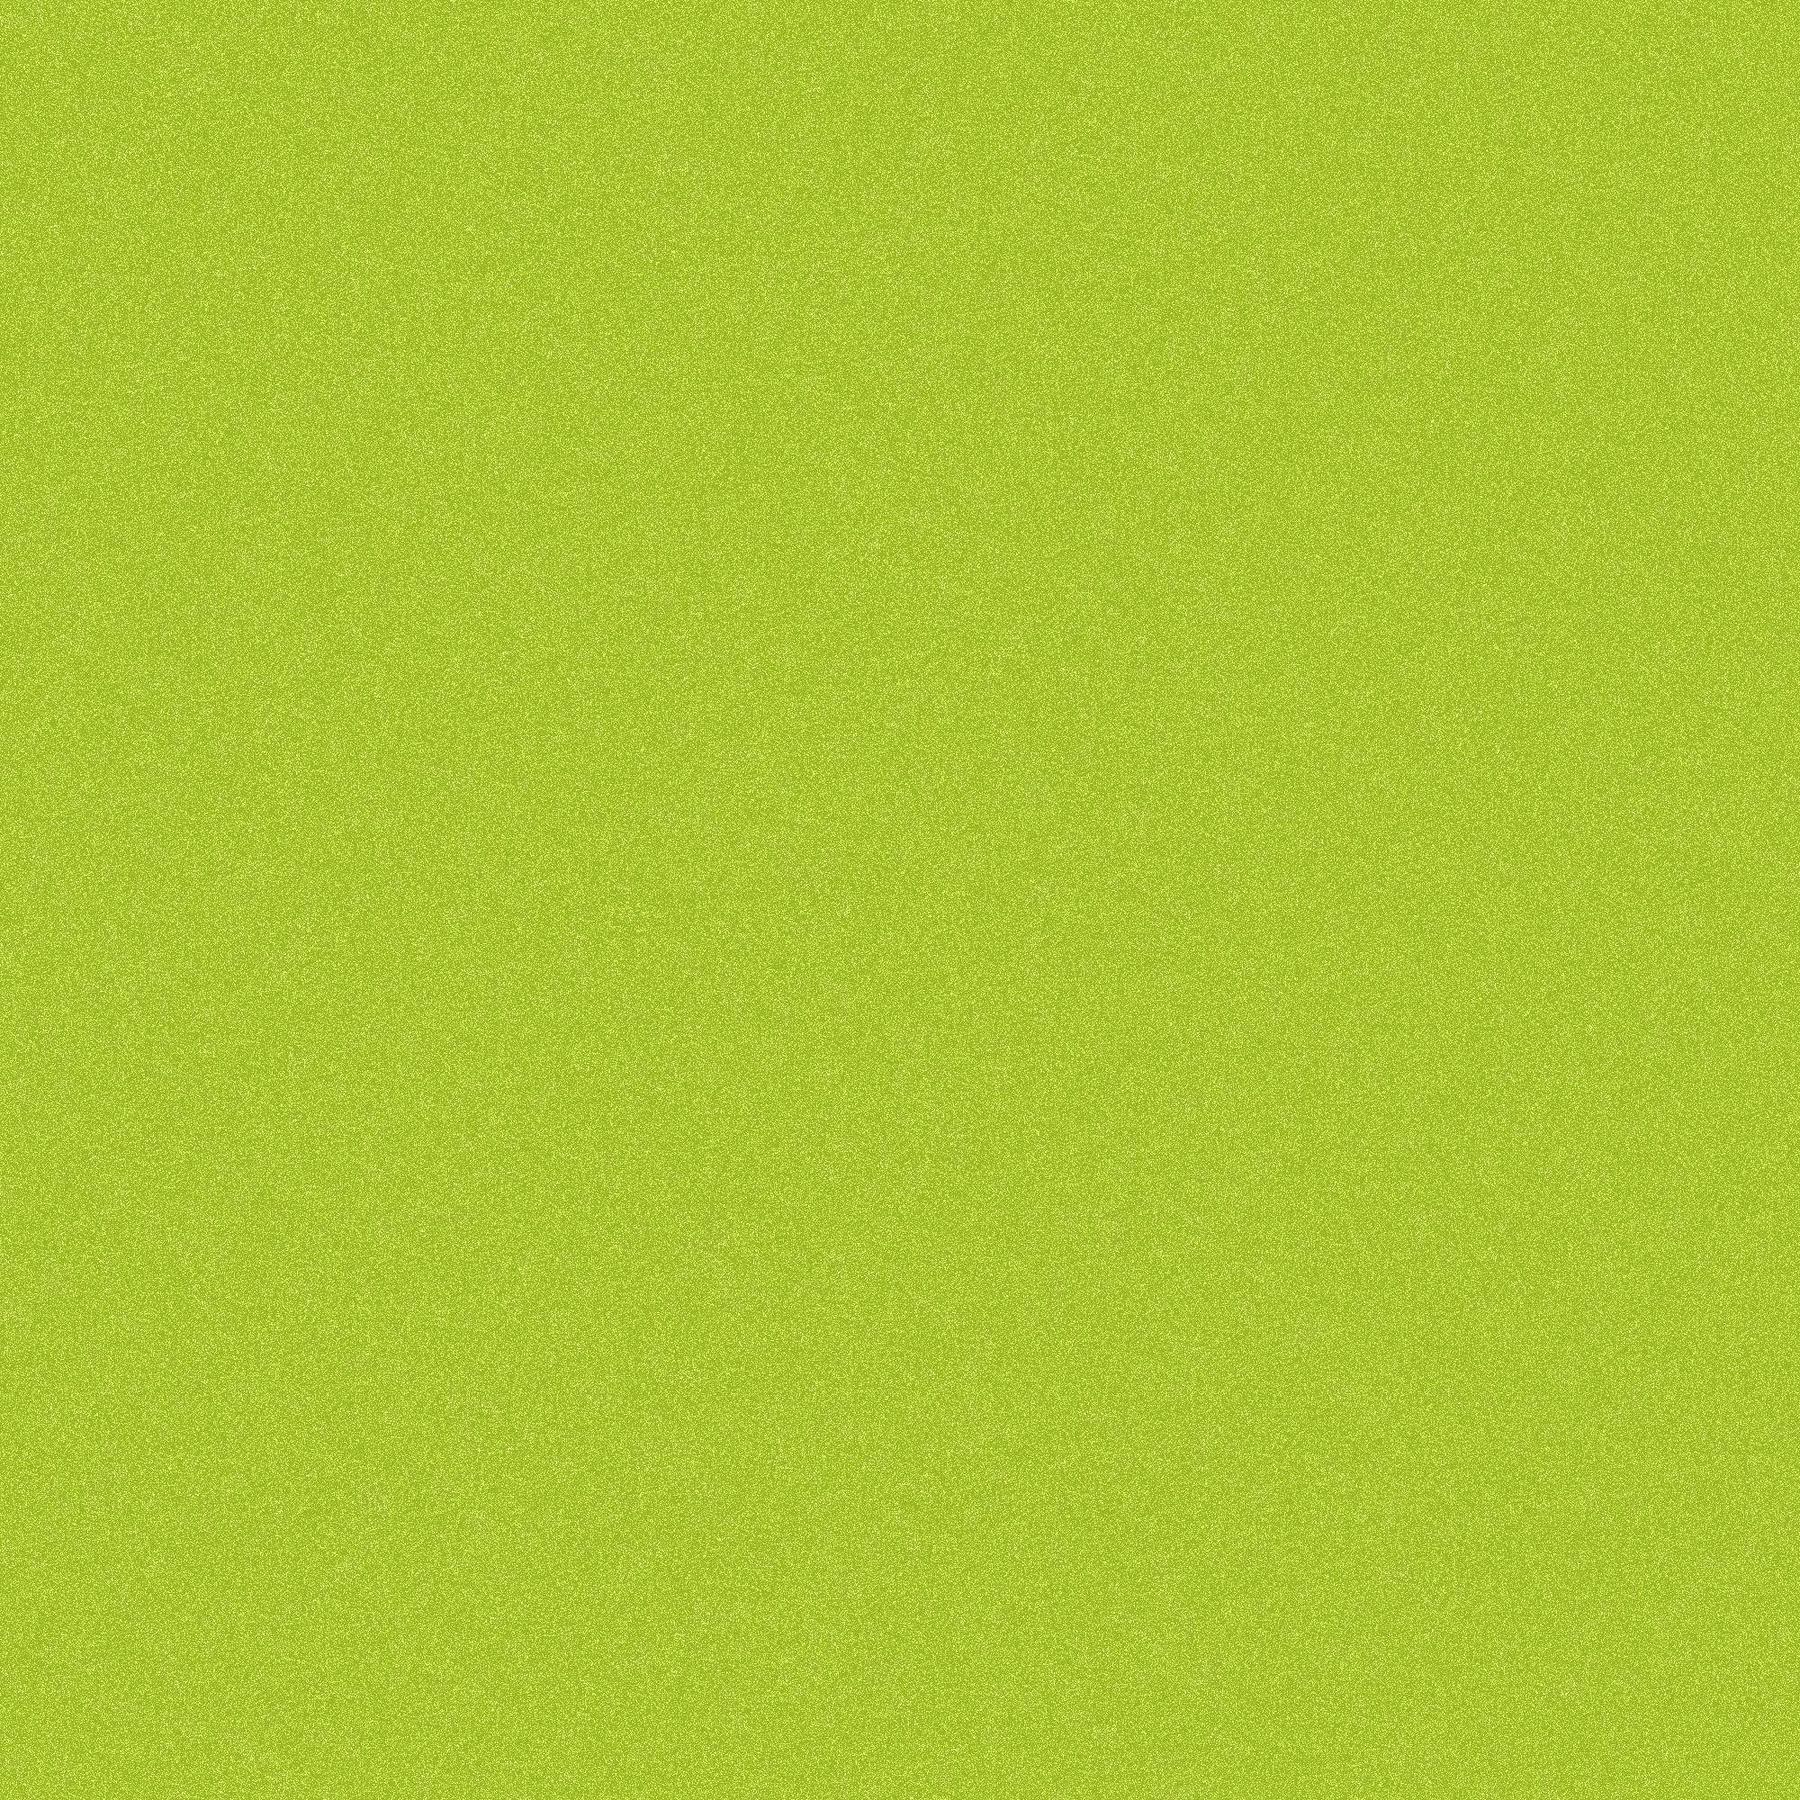 Light Green" Noise background texture. PNG:Public Domain. ICON